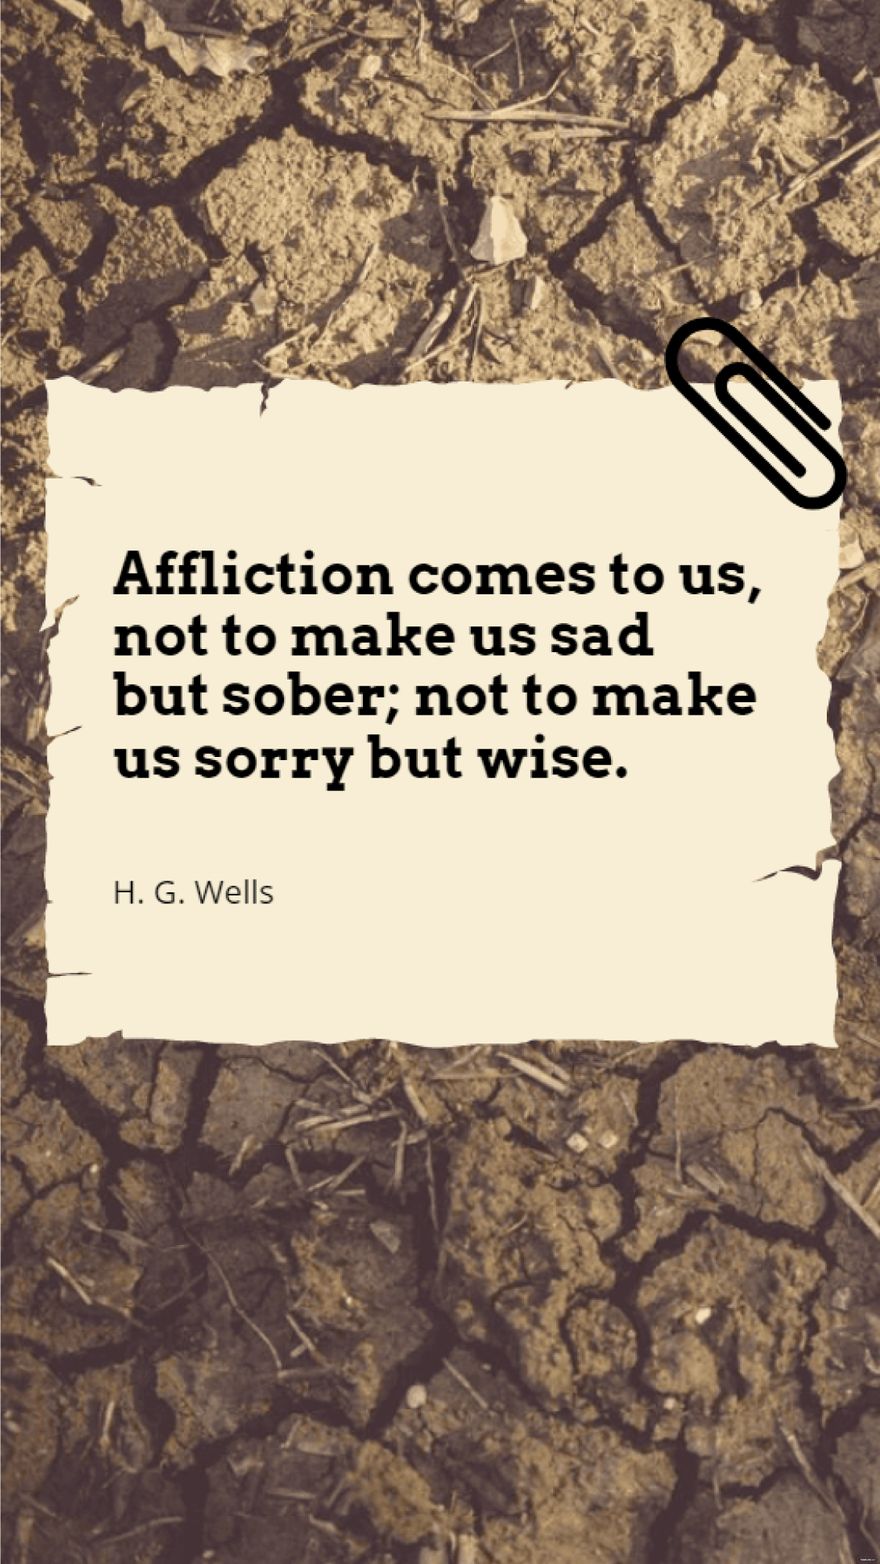 H. G. Wells - Affliction comes to us, not to make us sad but sober; not to make us sorry but wise.